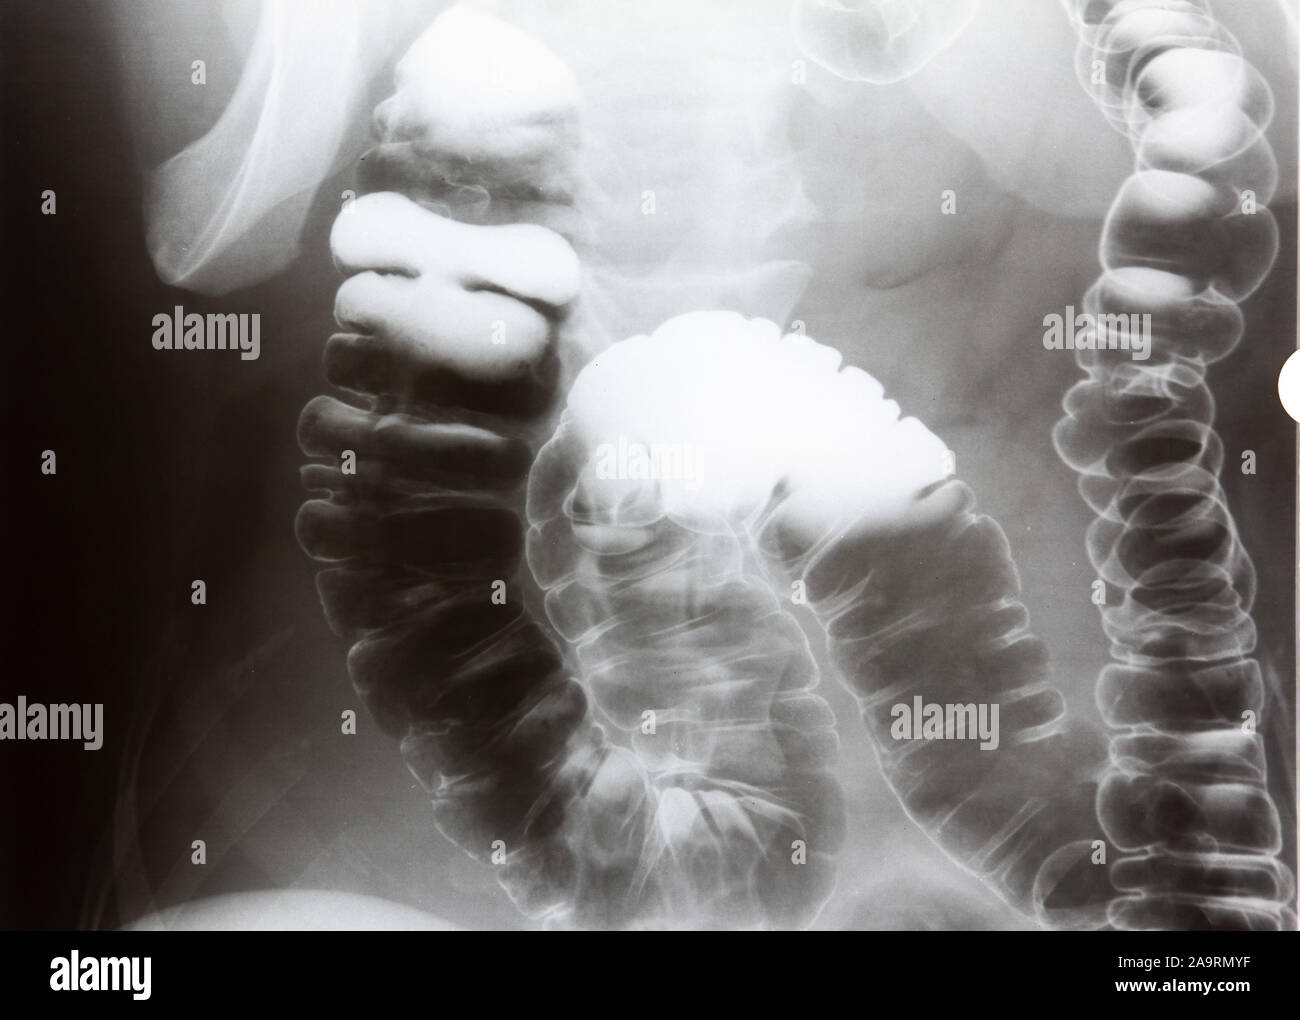 X-ray With Opaque Contrast Medium That Shows Intestine: Spine And Hip In  Background , With Marker Stock Photo, Picture and Royalty Free Image. Image  44132950.